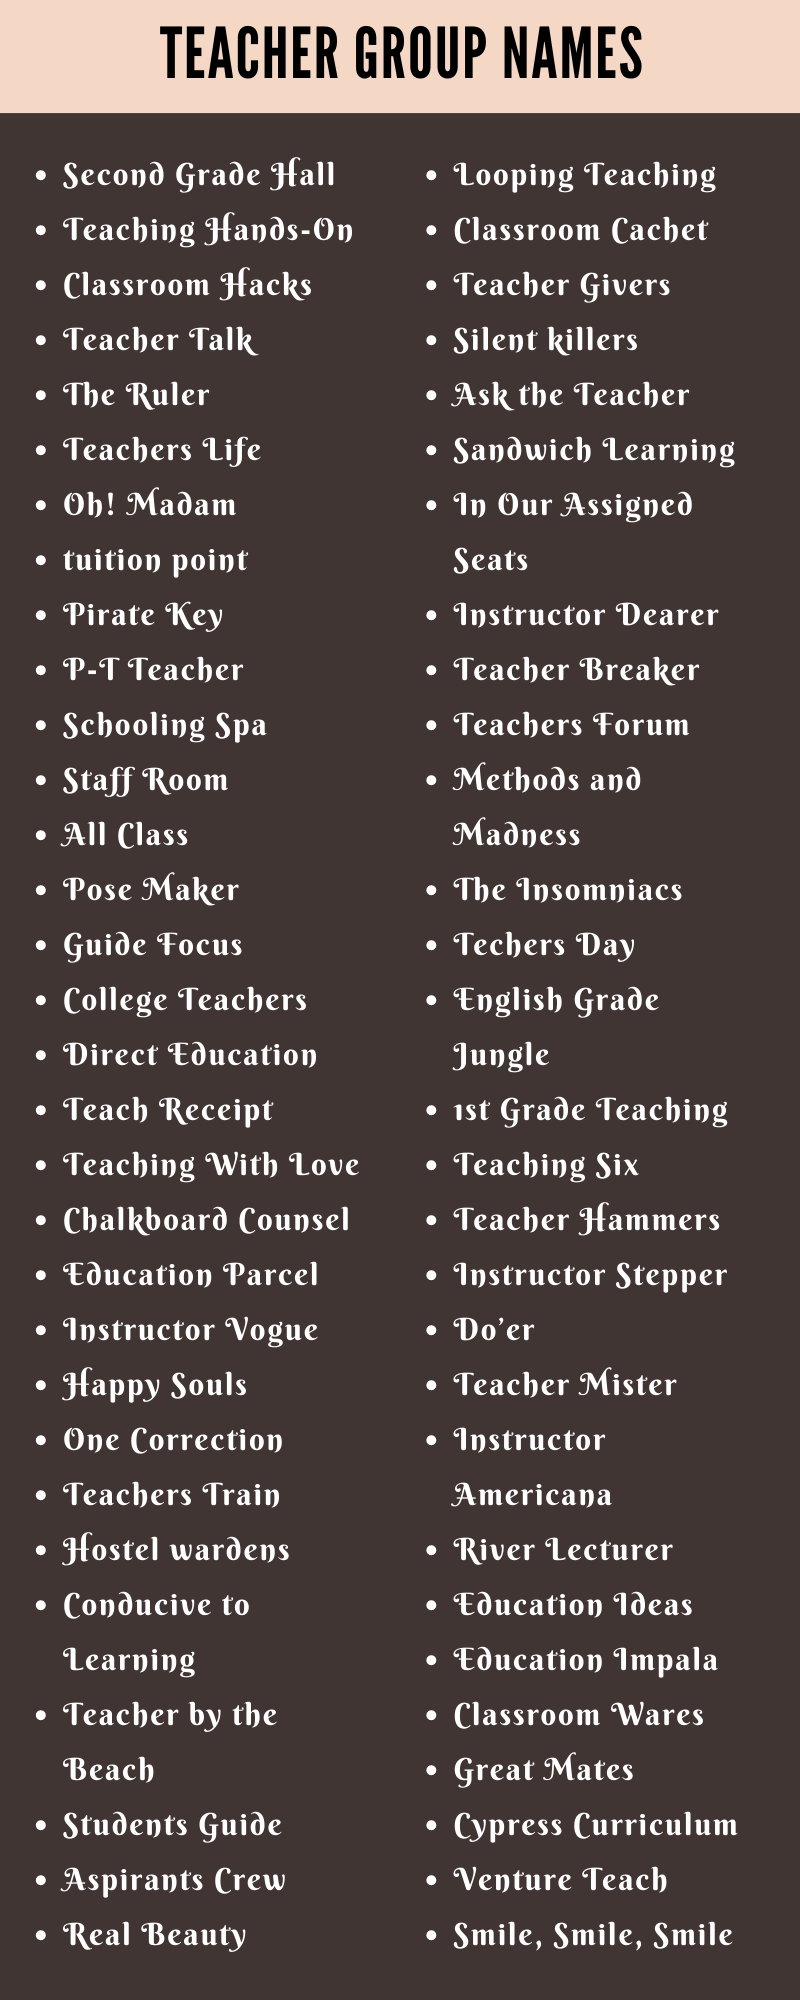 400 Cool Teacher Group Names Ideas and Suggestions